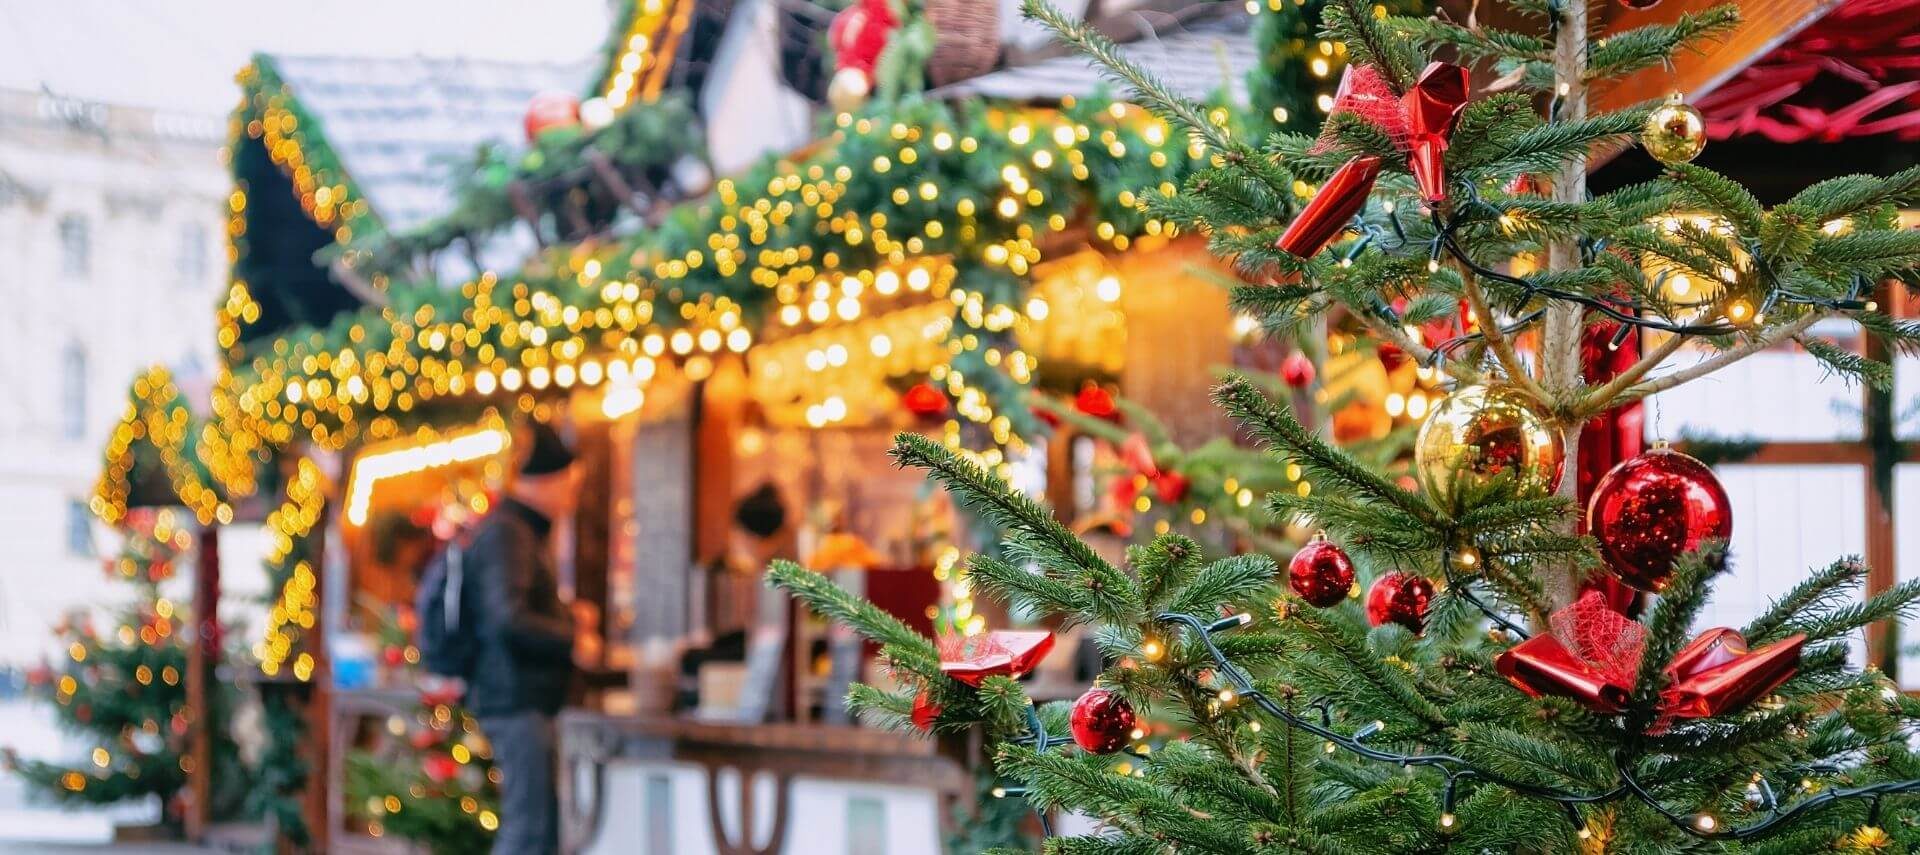 Open-air Christmas market decorated in Christmas finery and twinkling lights.